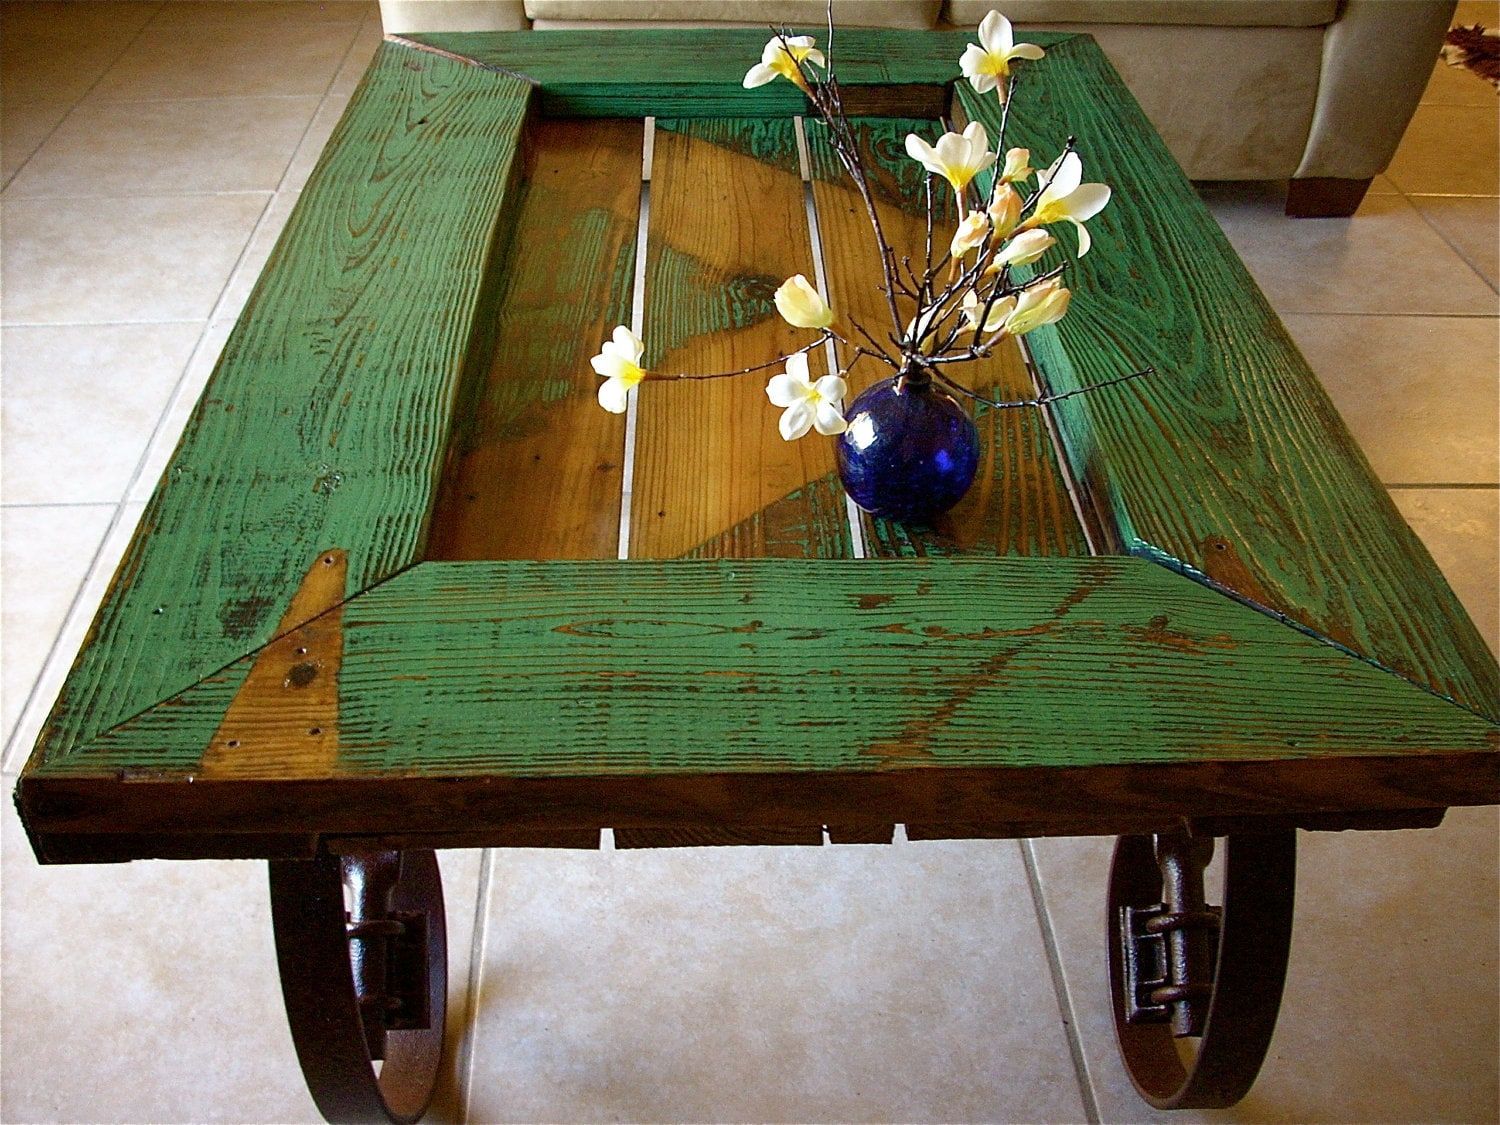 Barn Door Coffee Table Inside Coffee Tables With Storage And Barn Doors (View 7 of 20)